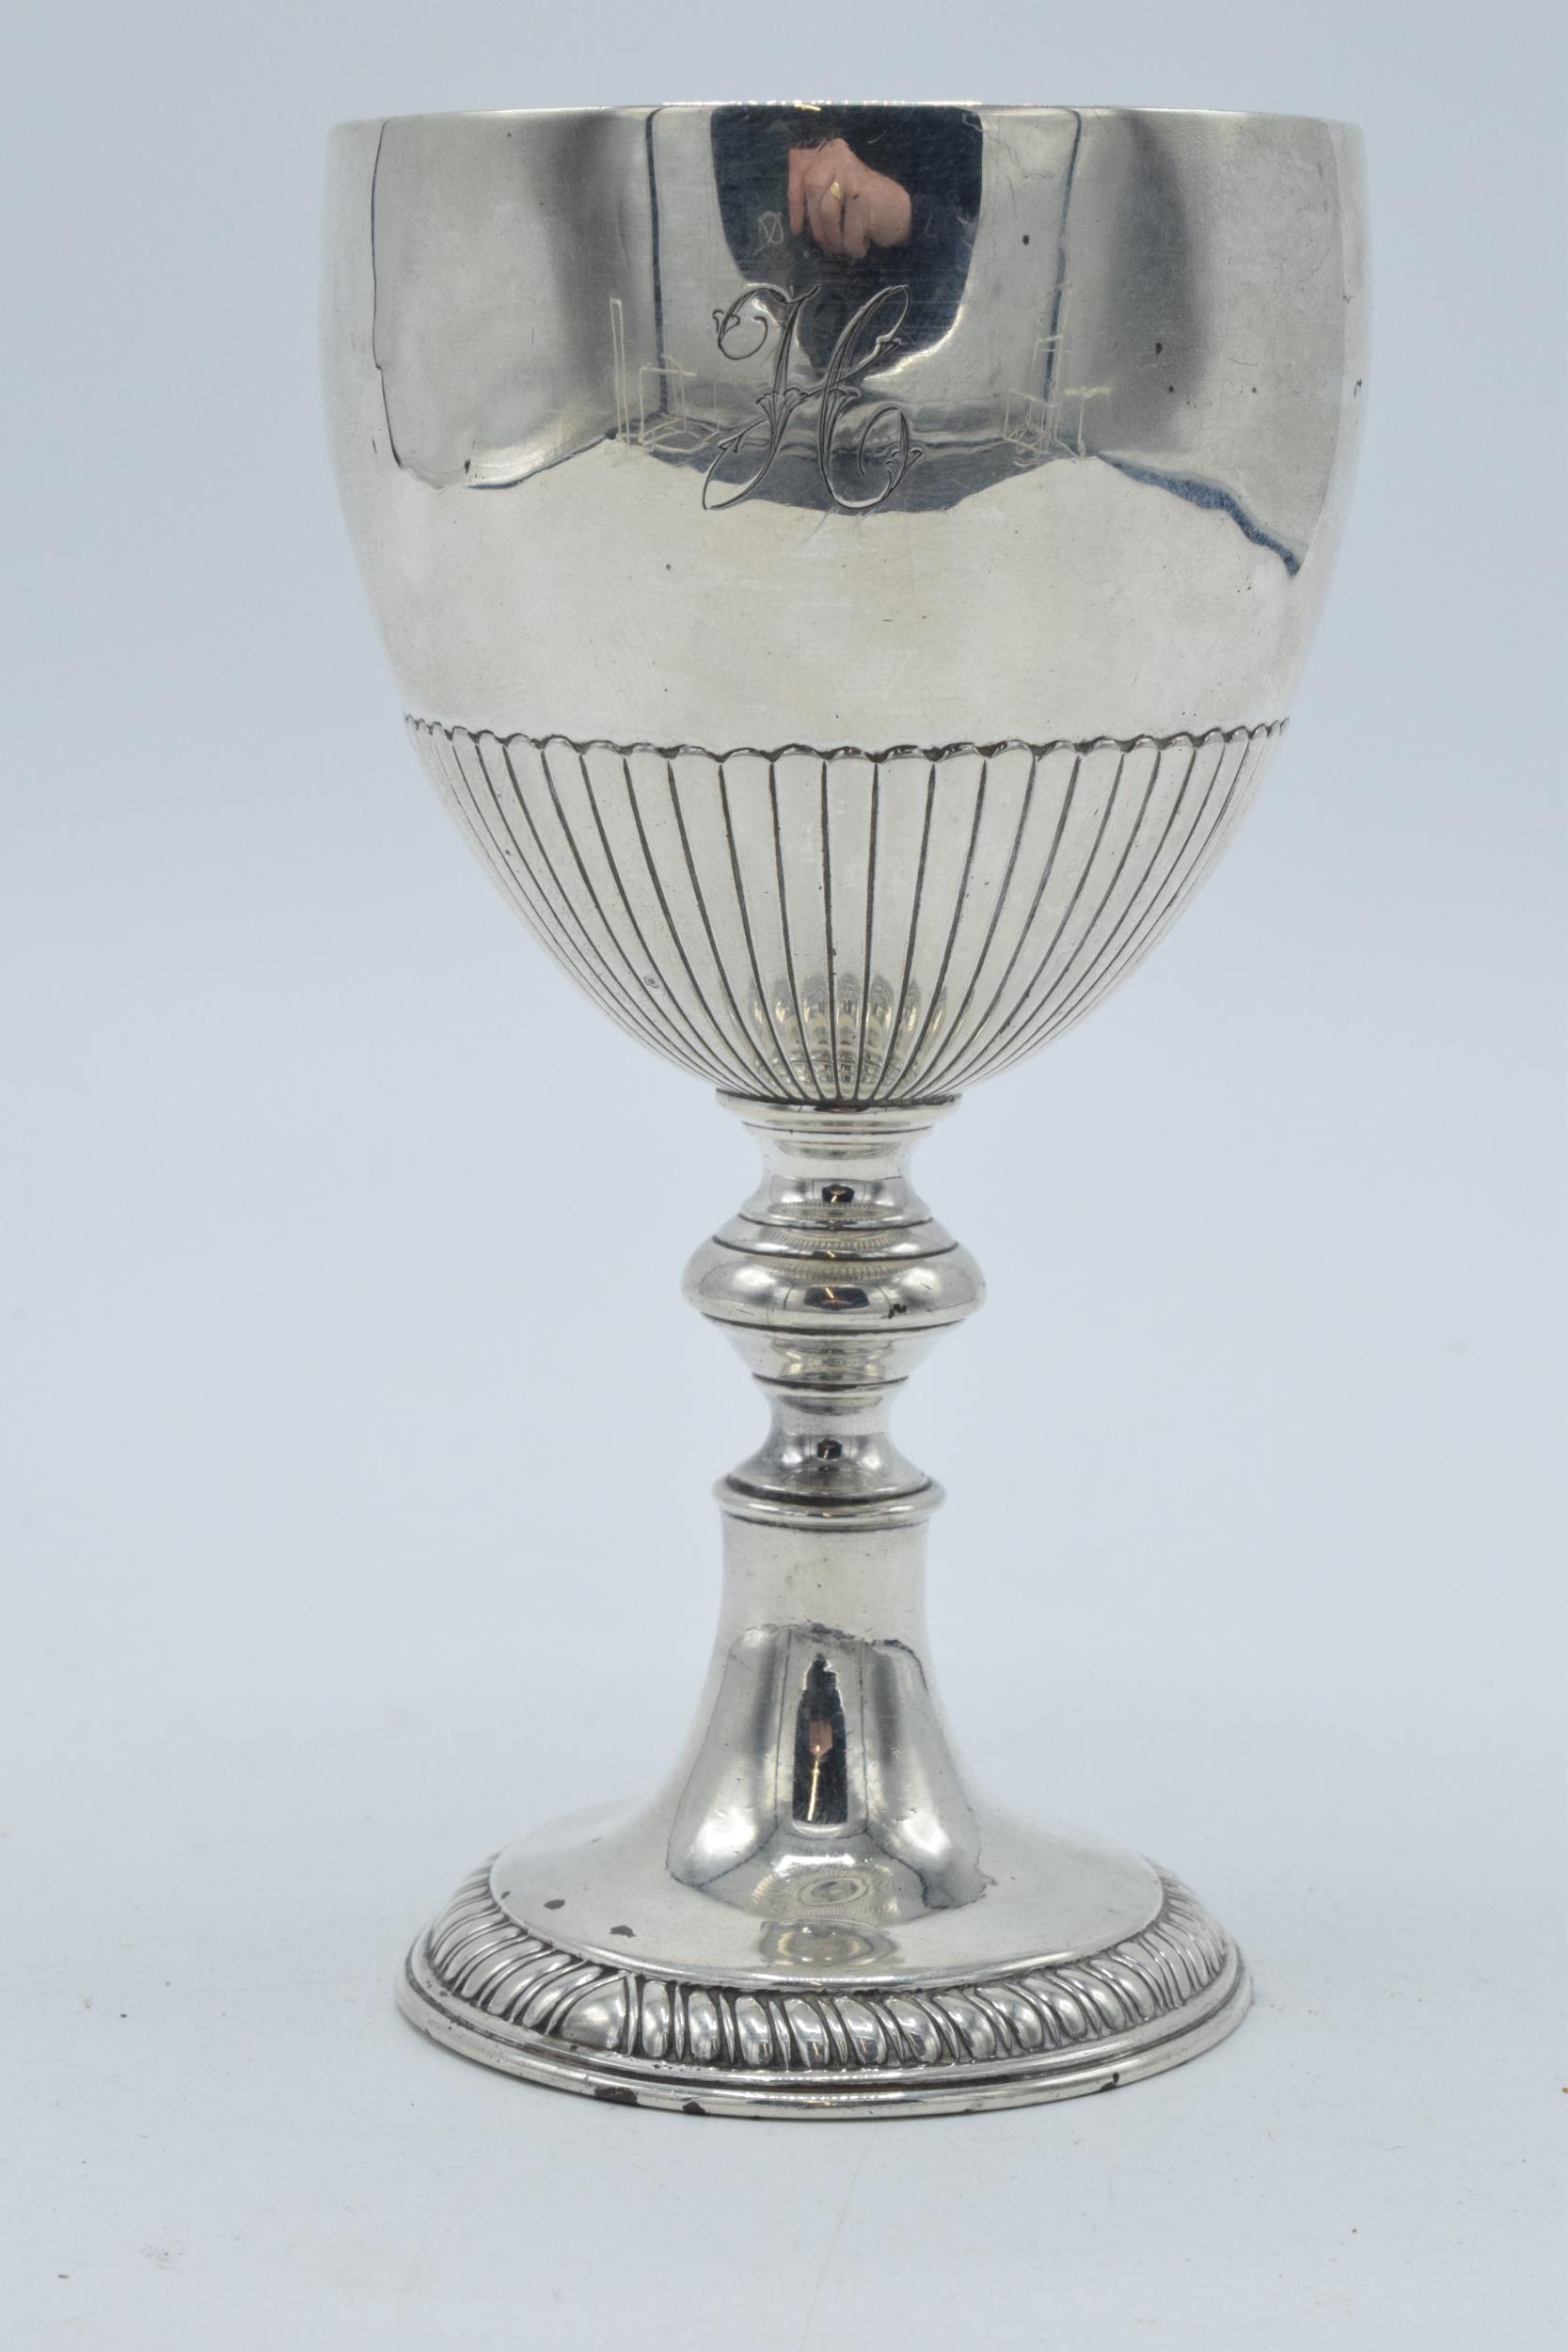 Victorian silver chalice with monogram engraved, 101.2 grams, 11.5cm tall, unhallmarked. - Image 2 of 4